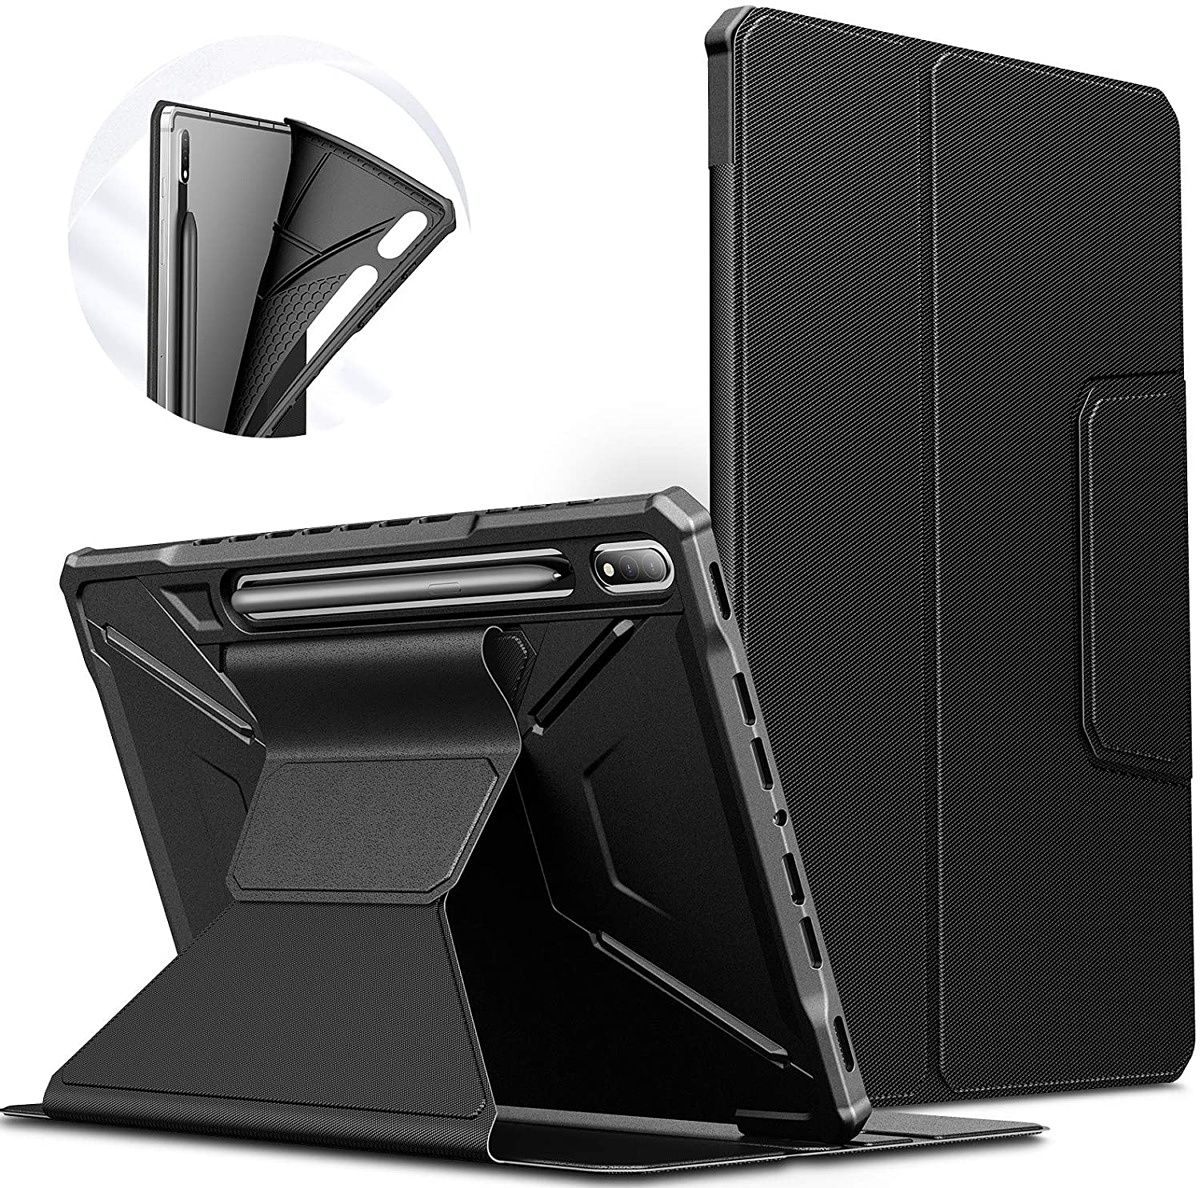 This is a shockproof case that also has a folio that can be used to prop-up the tablet at multiple different angles. Also has an S Pen holder.